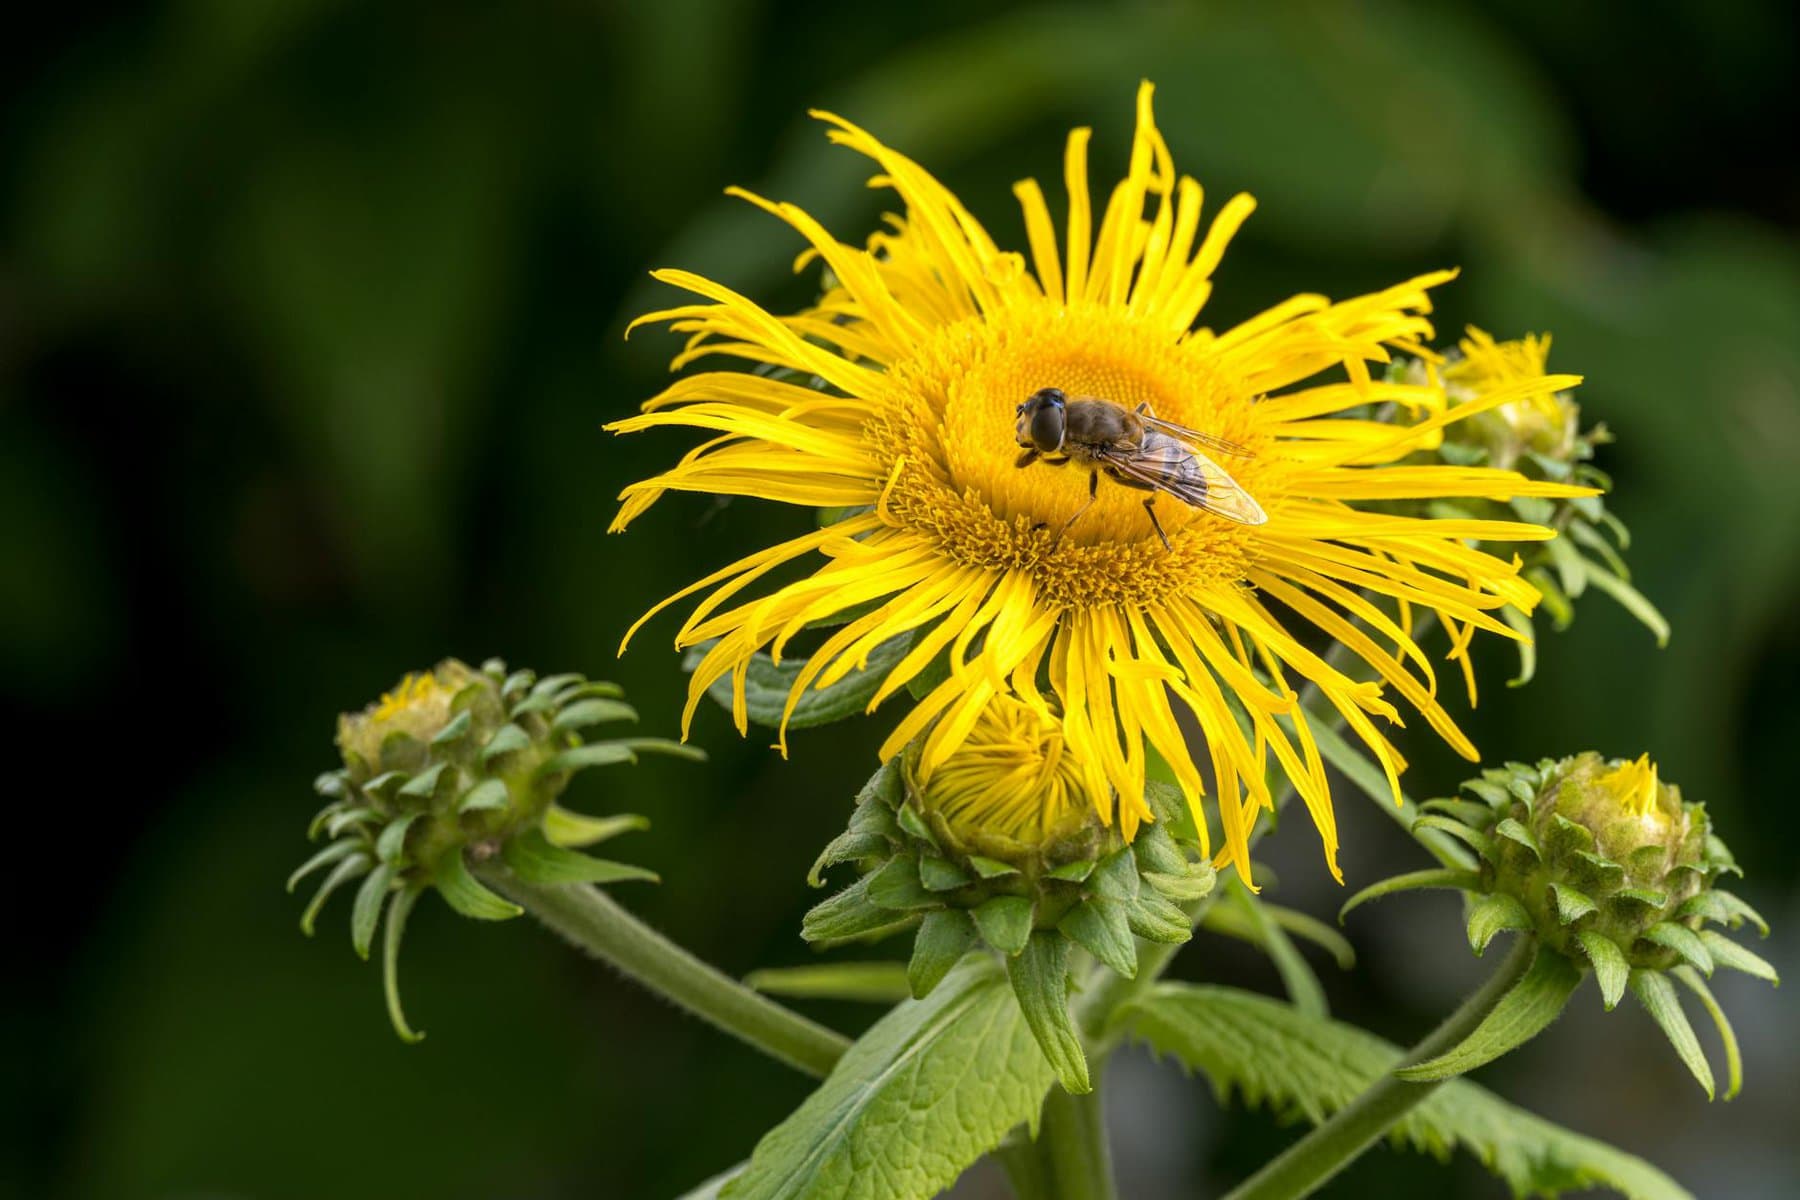 Did You Know Elecampane Can Soothe Respiratory Ailments? Learn How To Use It